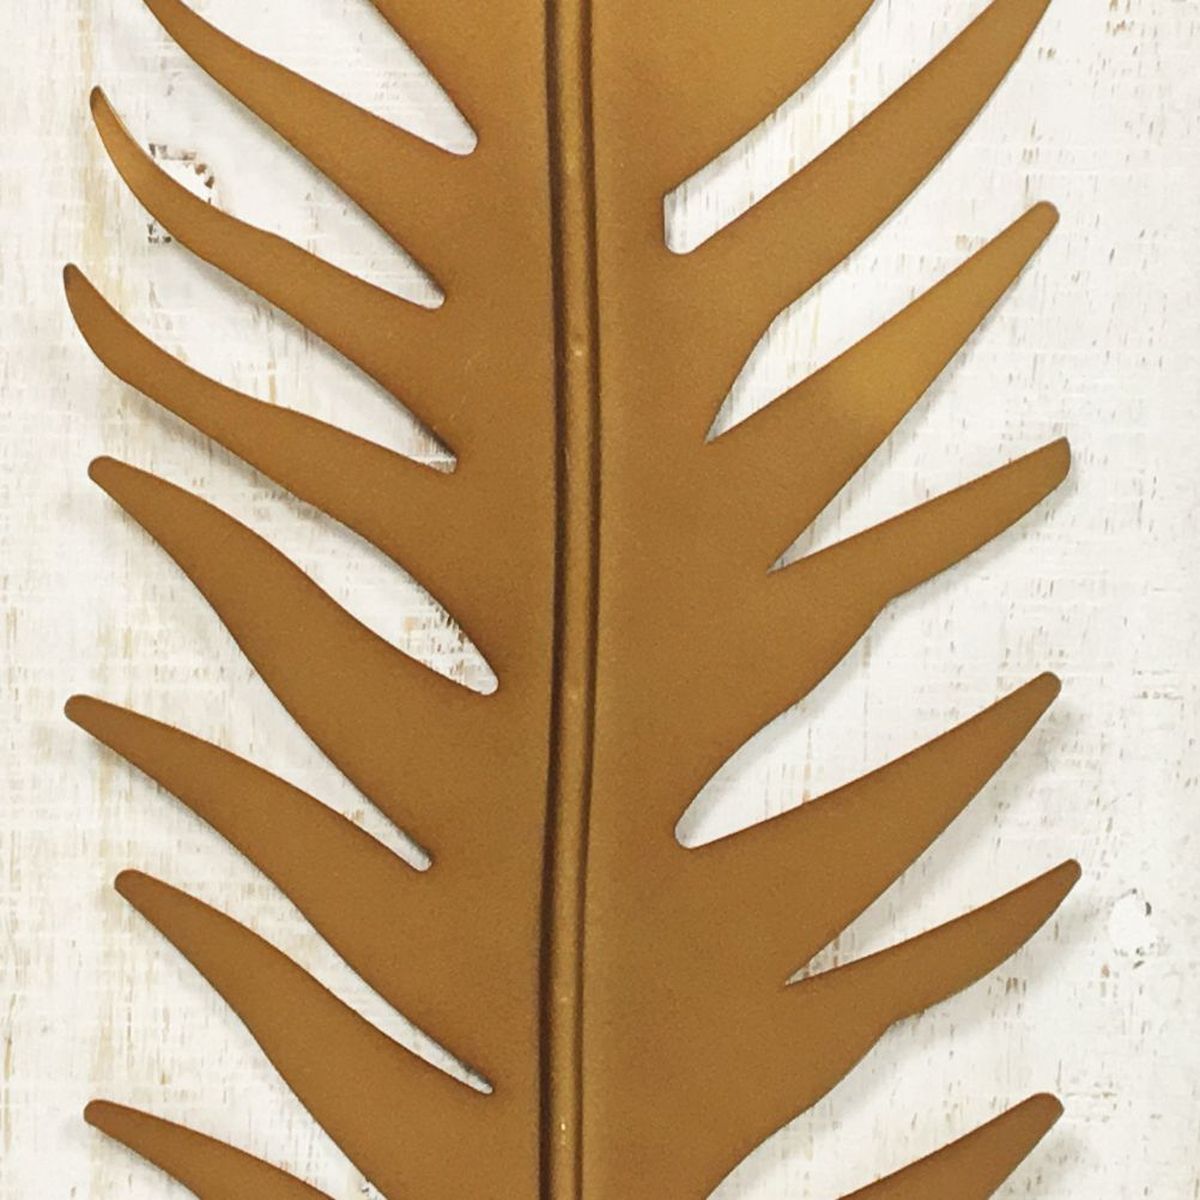 Metal Structure to hang Fern Leaf